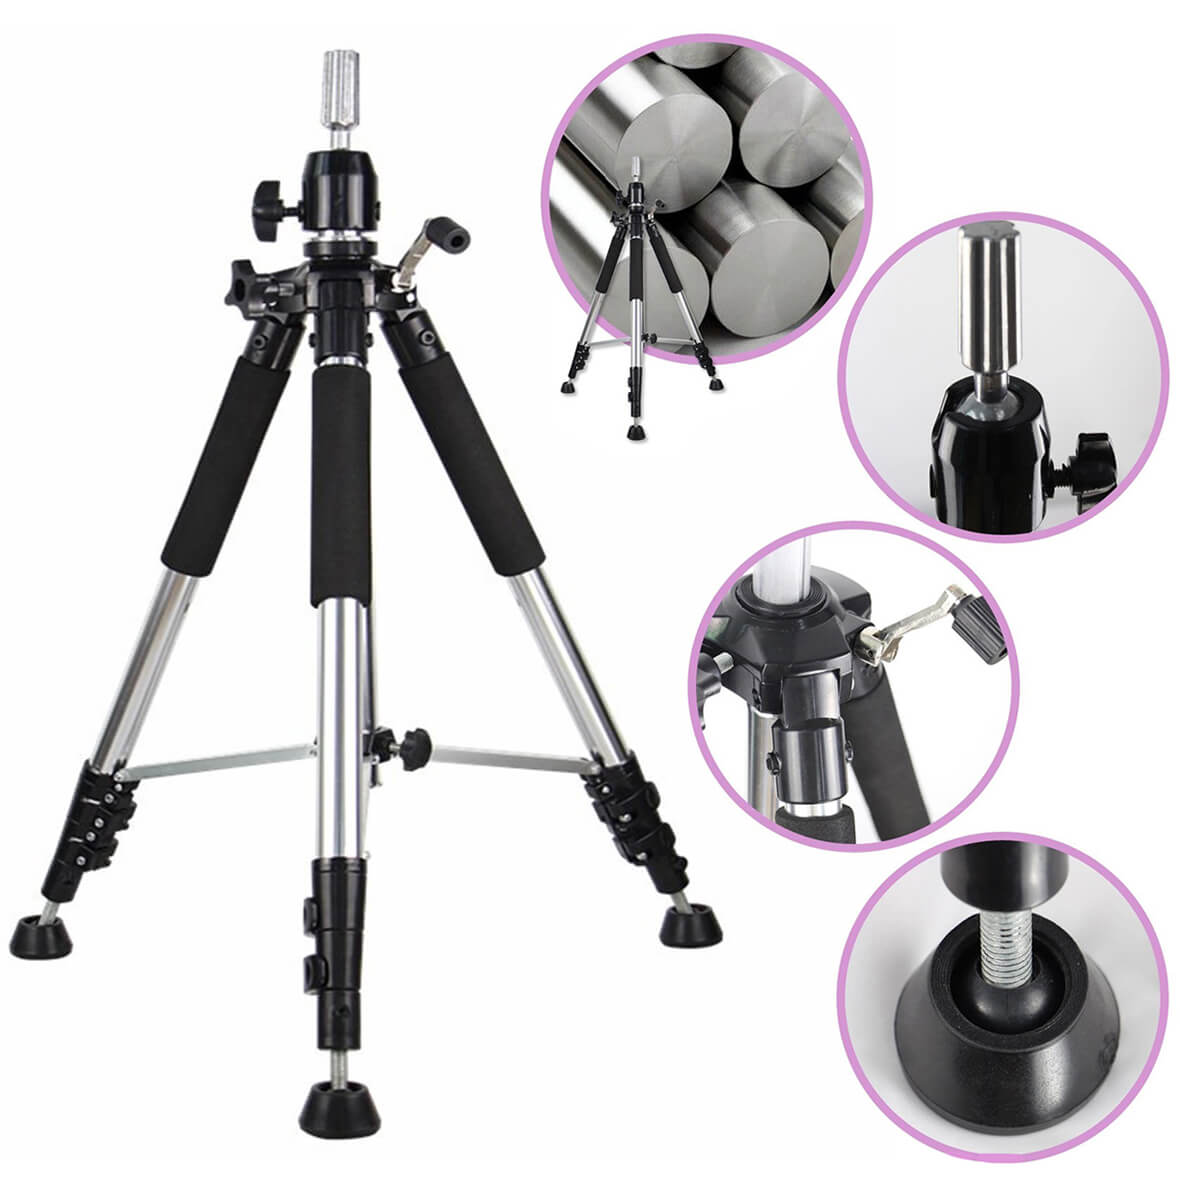 140cm High Tripod Stand for Wig Making Canvas Head Mannequin Head Styling  Practice Training Head Adjustable DIY Wig Accessories - AliExpress